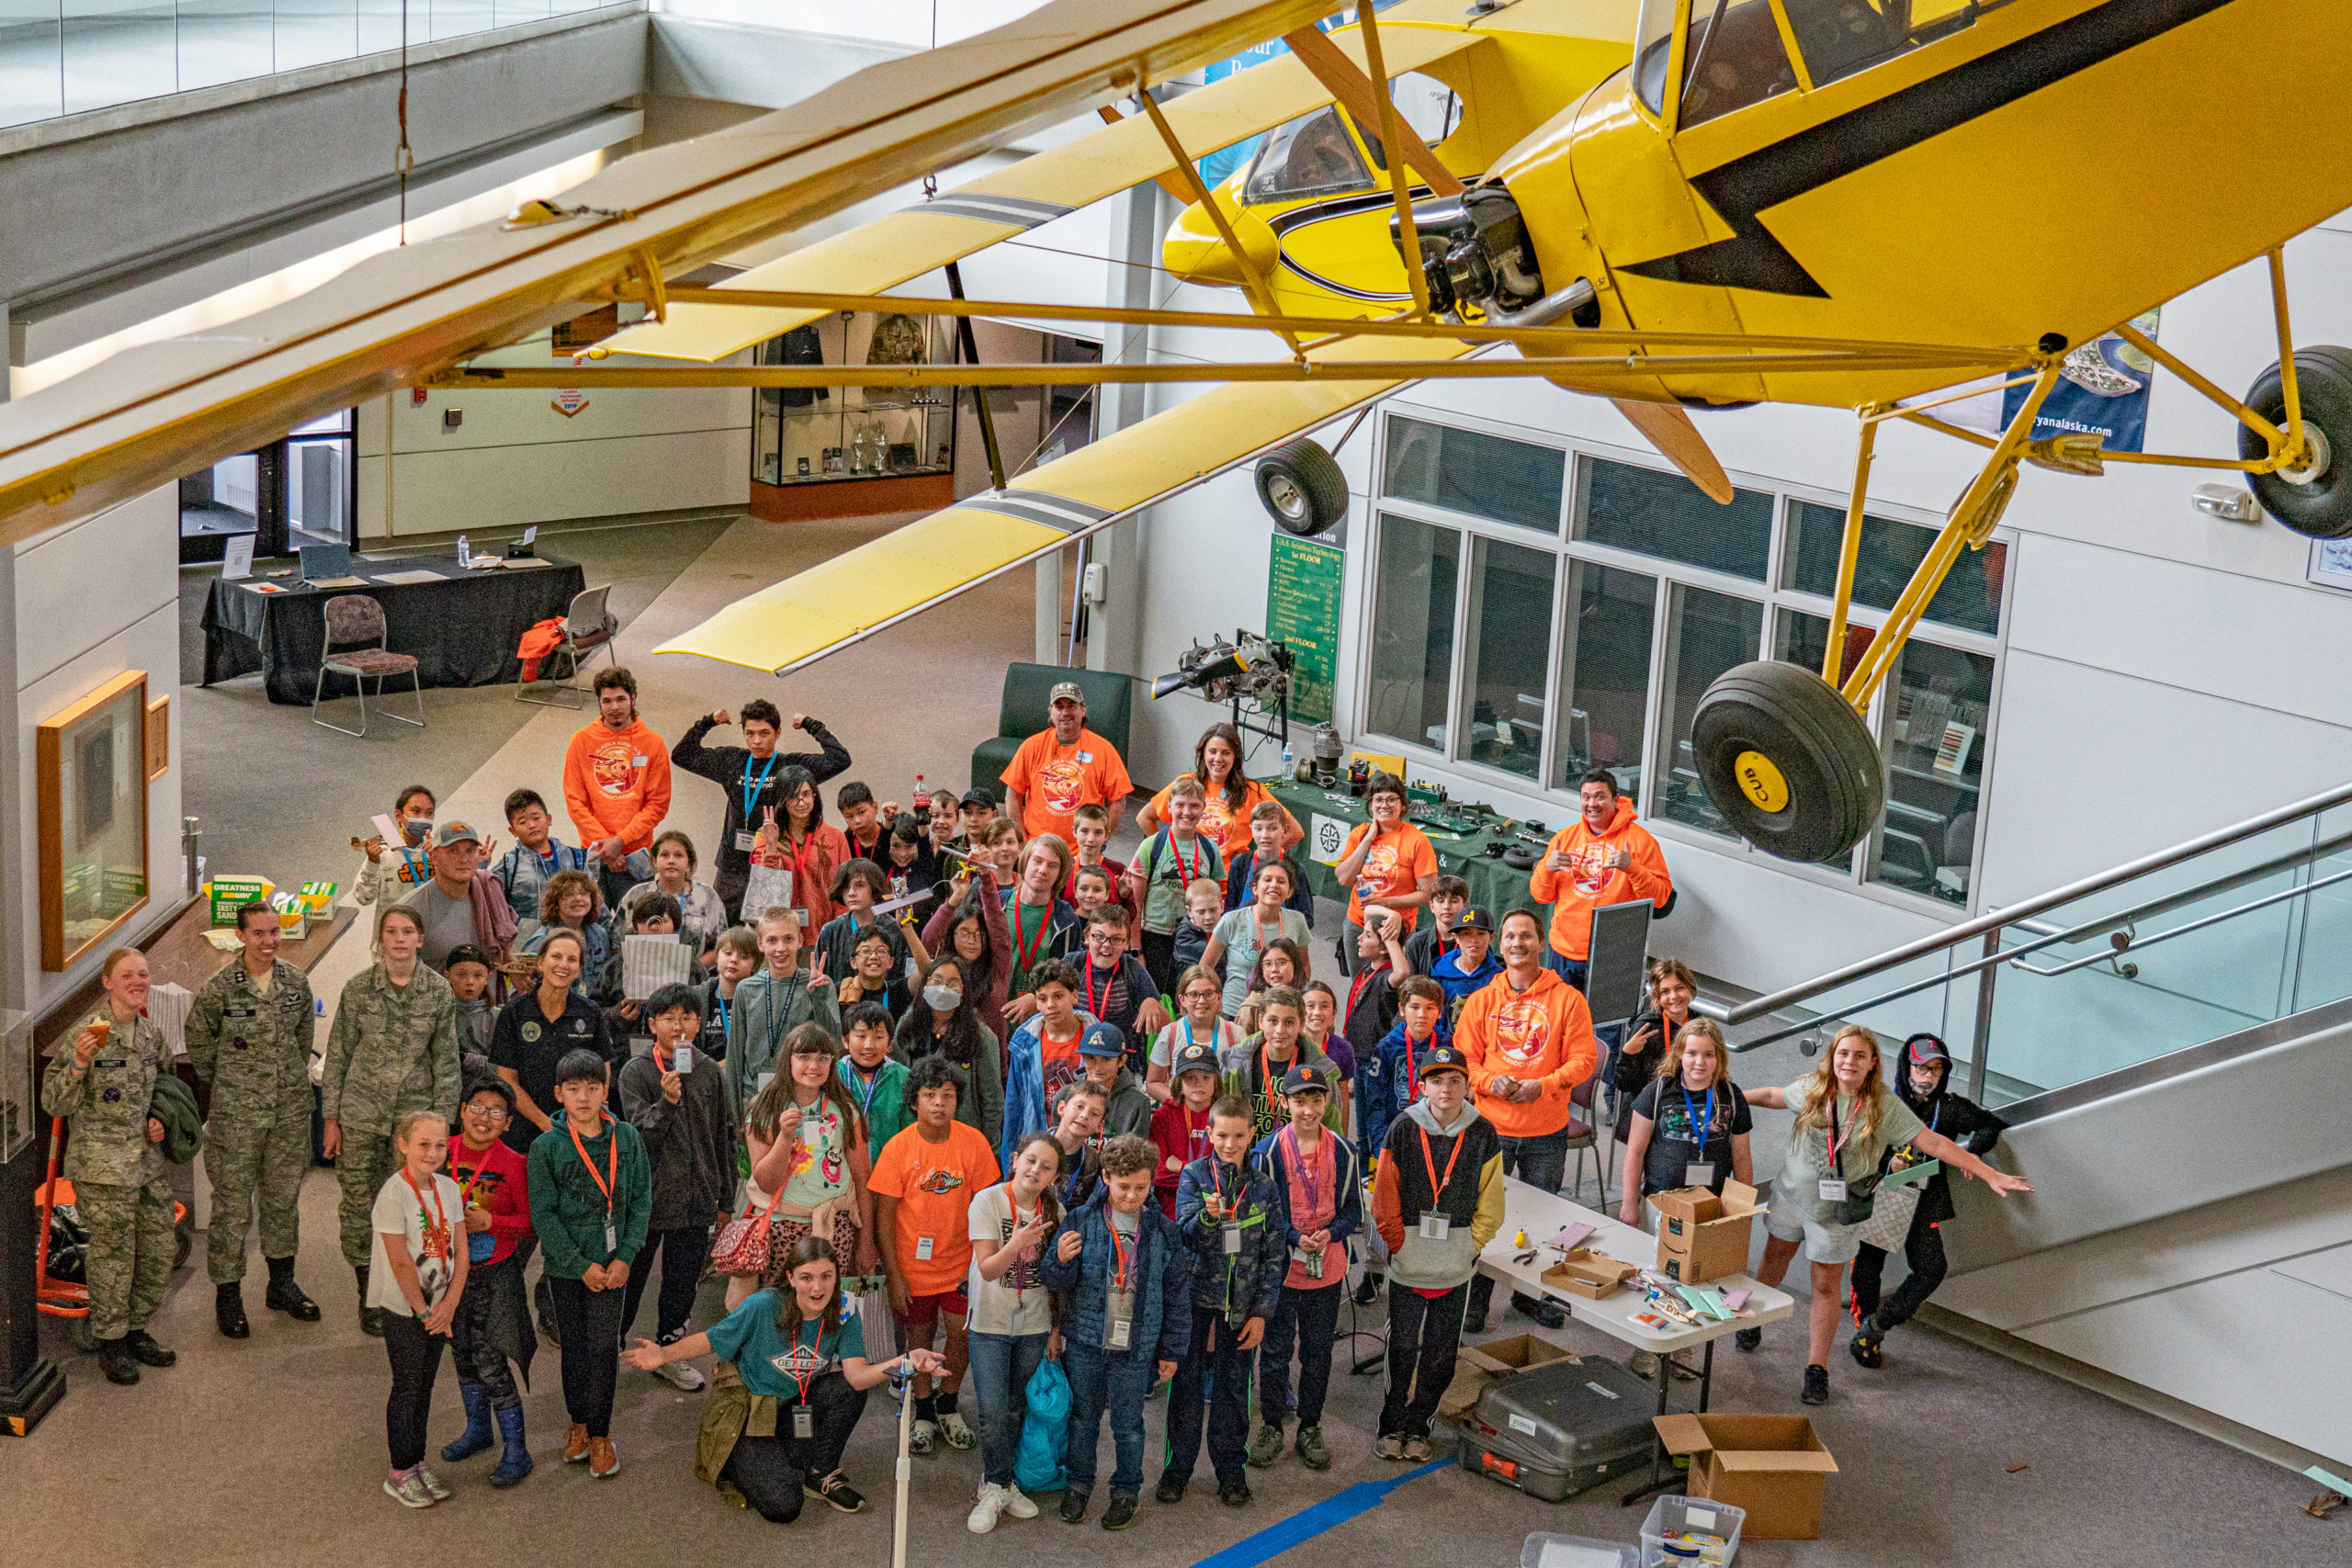 Annual Youth Aviation Day Camp 2022